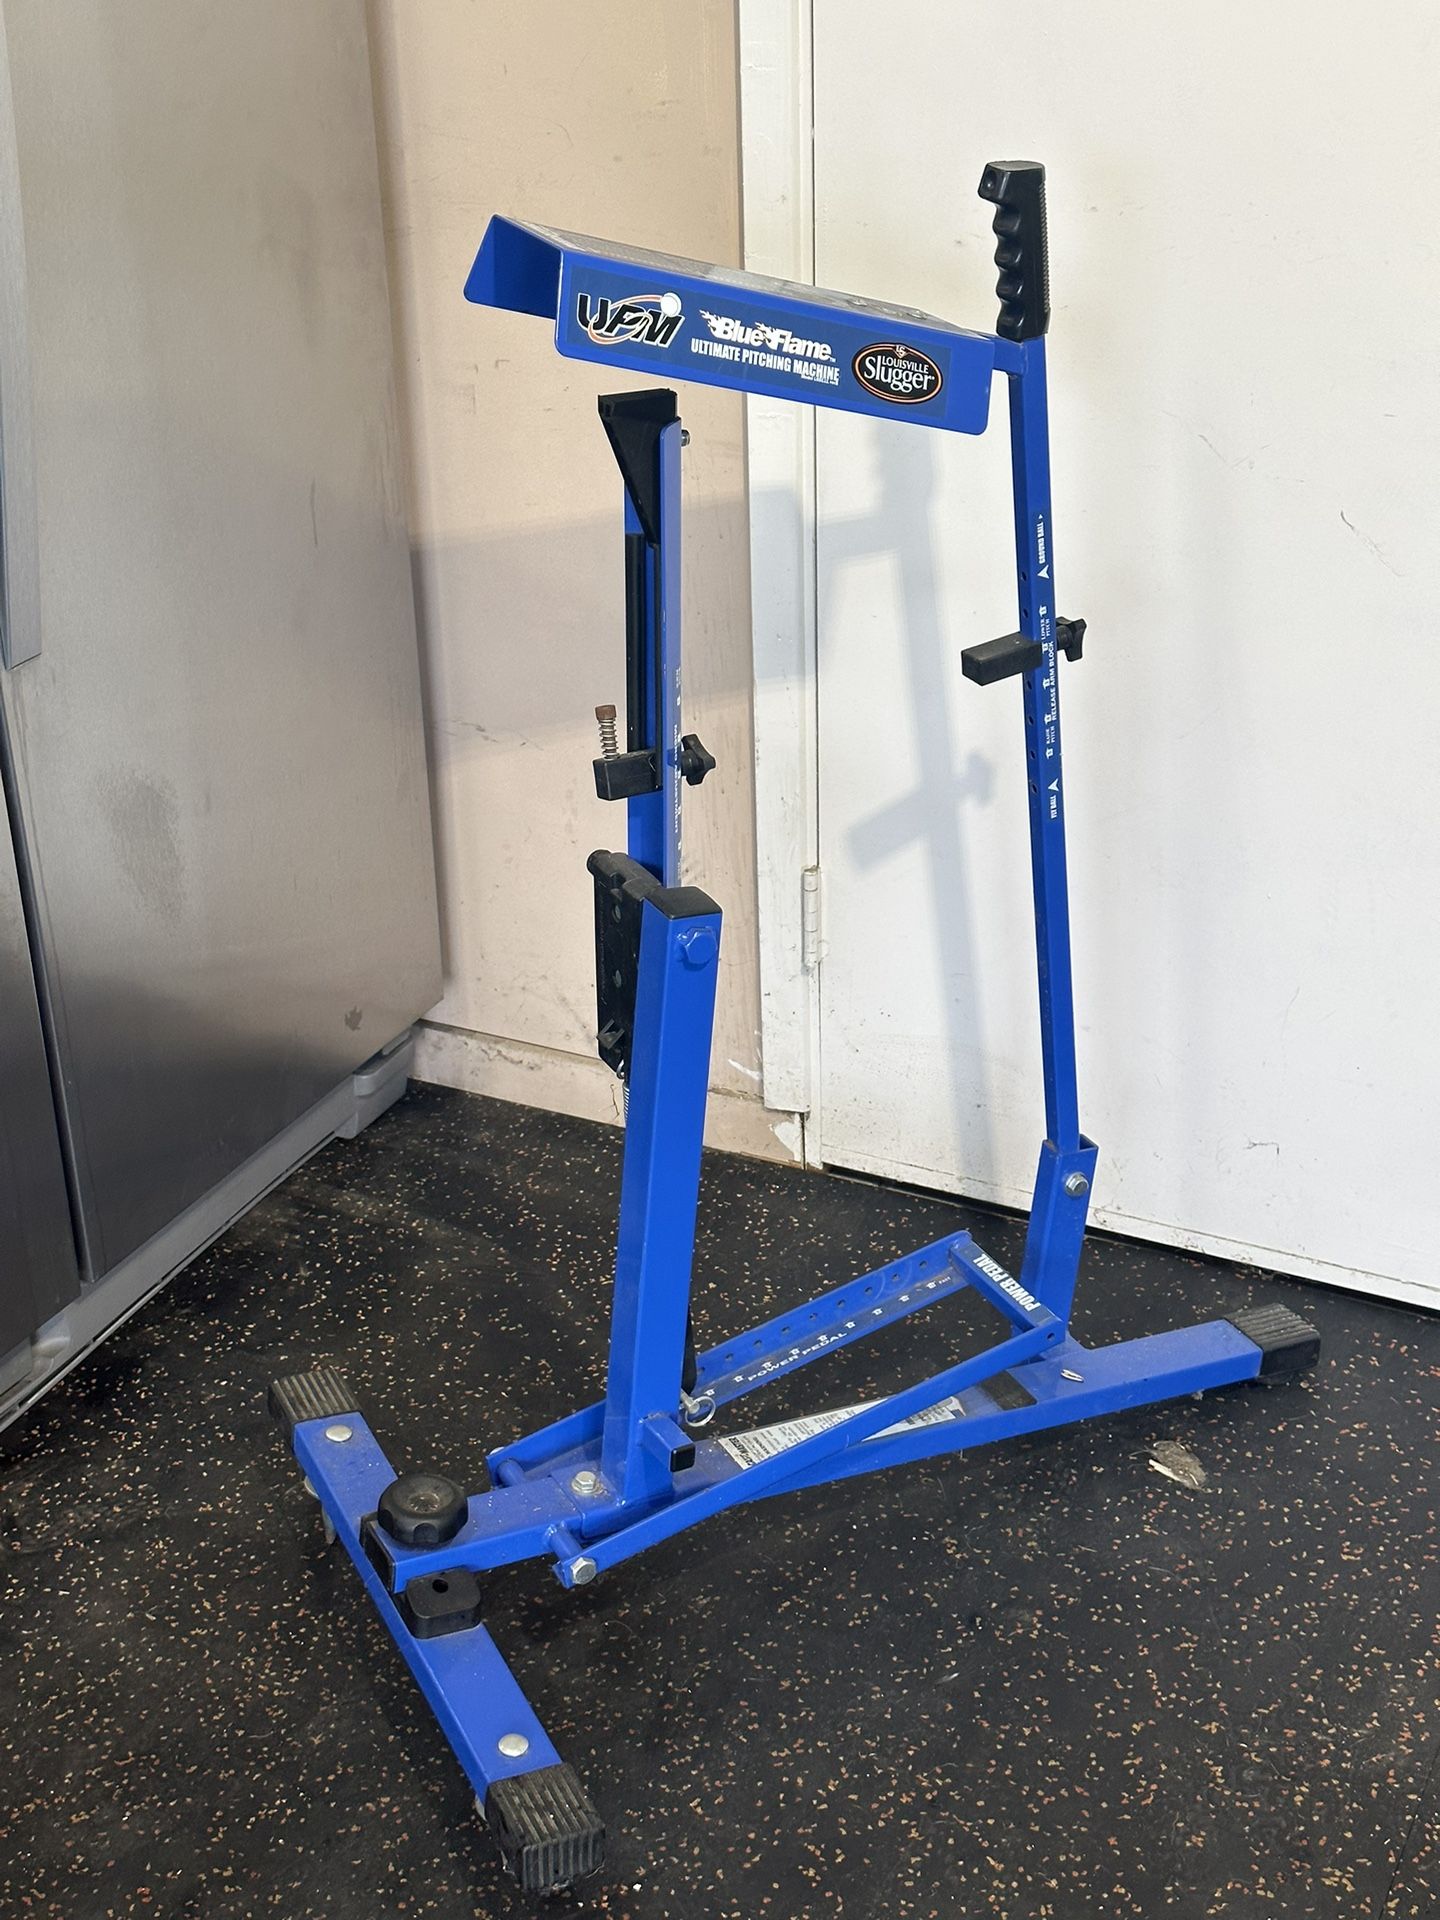 Louisville Slugger Blue Flame Pitching Machine for Sale in Placentia, CA -  OfferUp